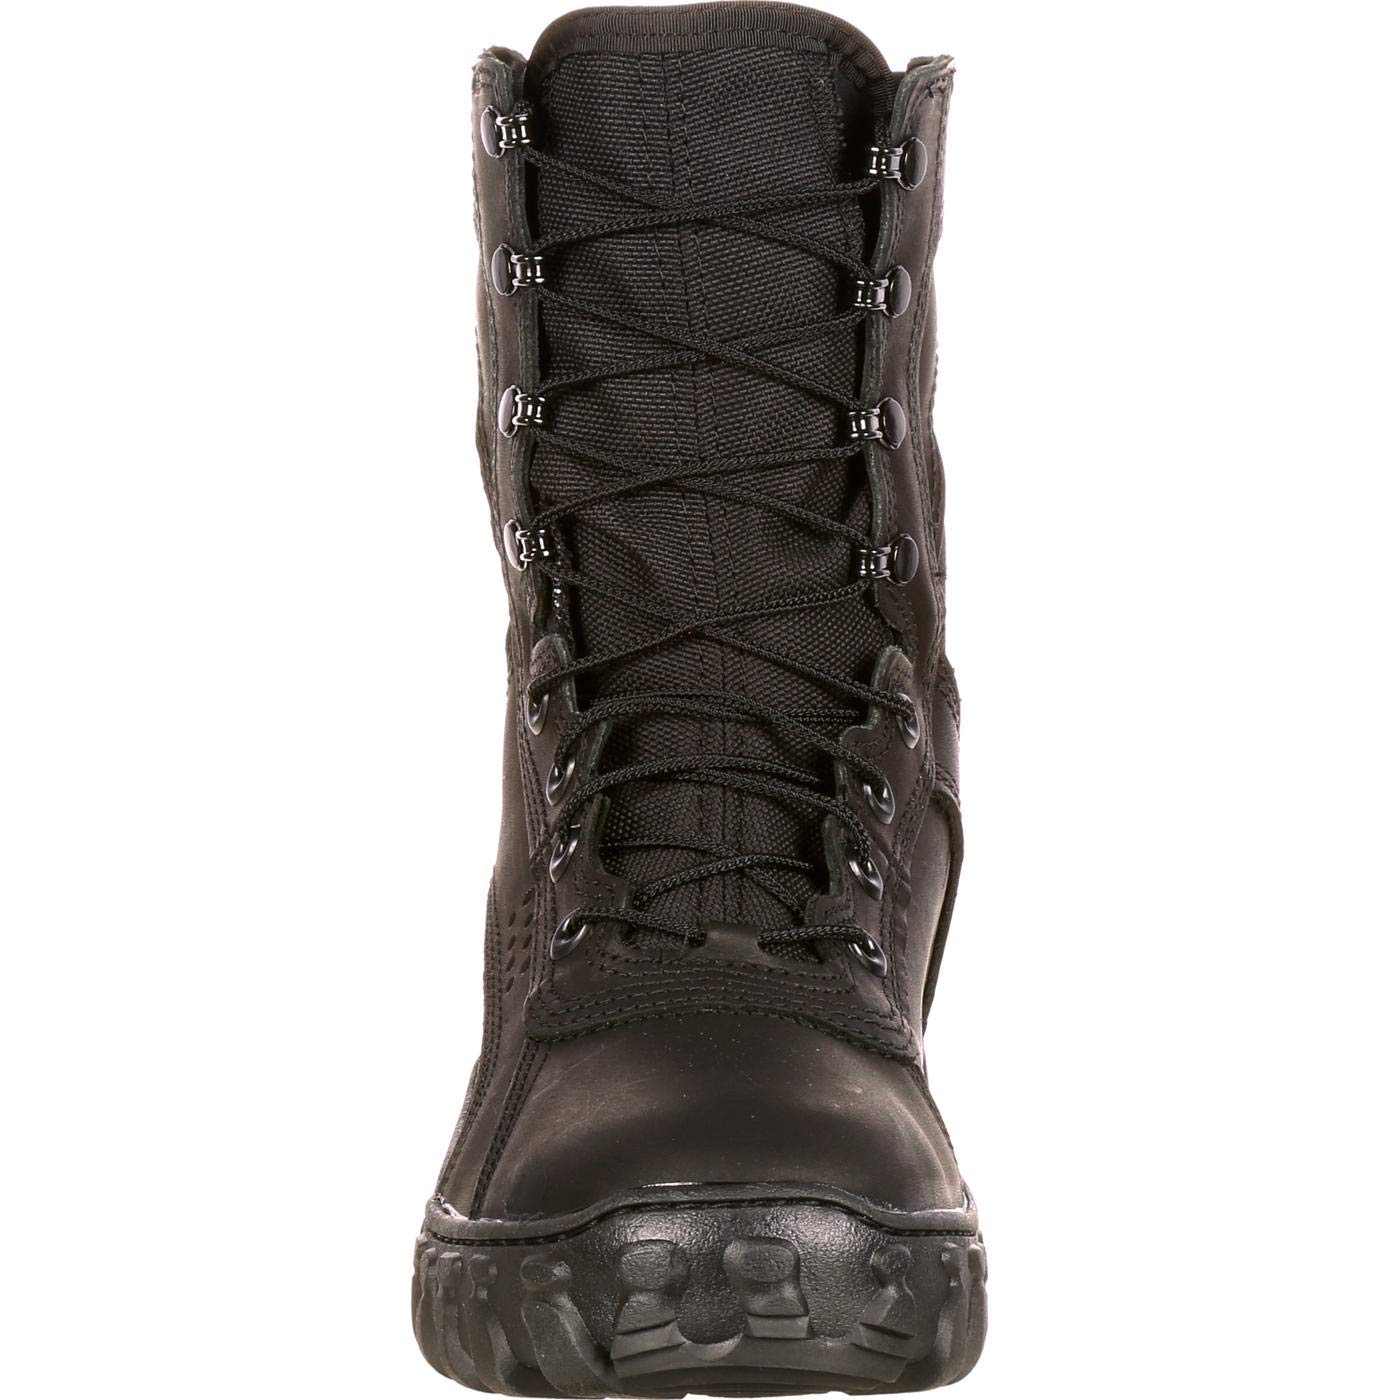 Rocky Men's FQ0000102 Military and Tactical Boot, Black, 13.5 M US